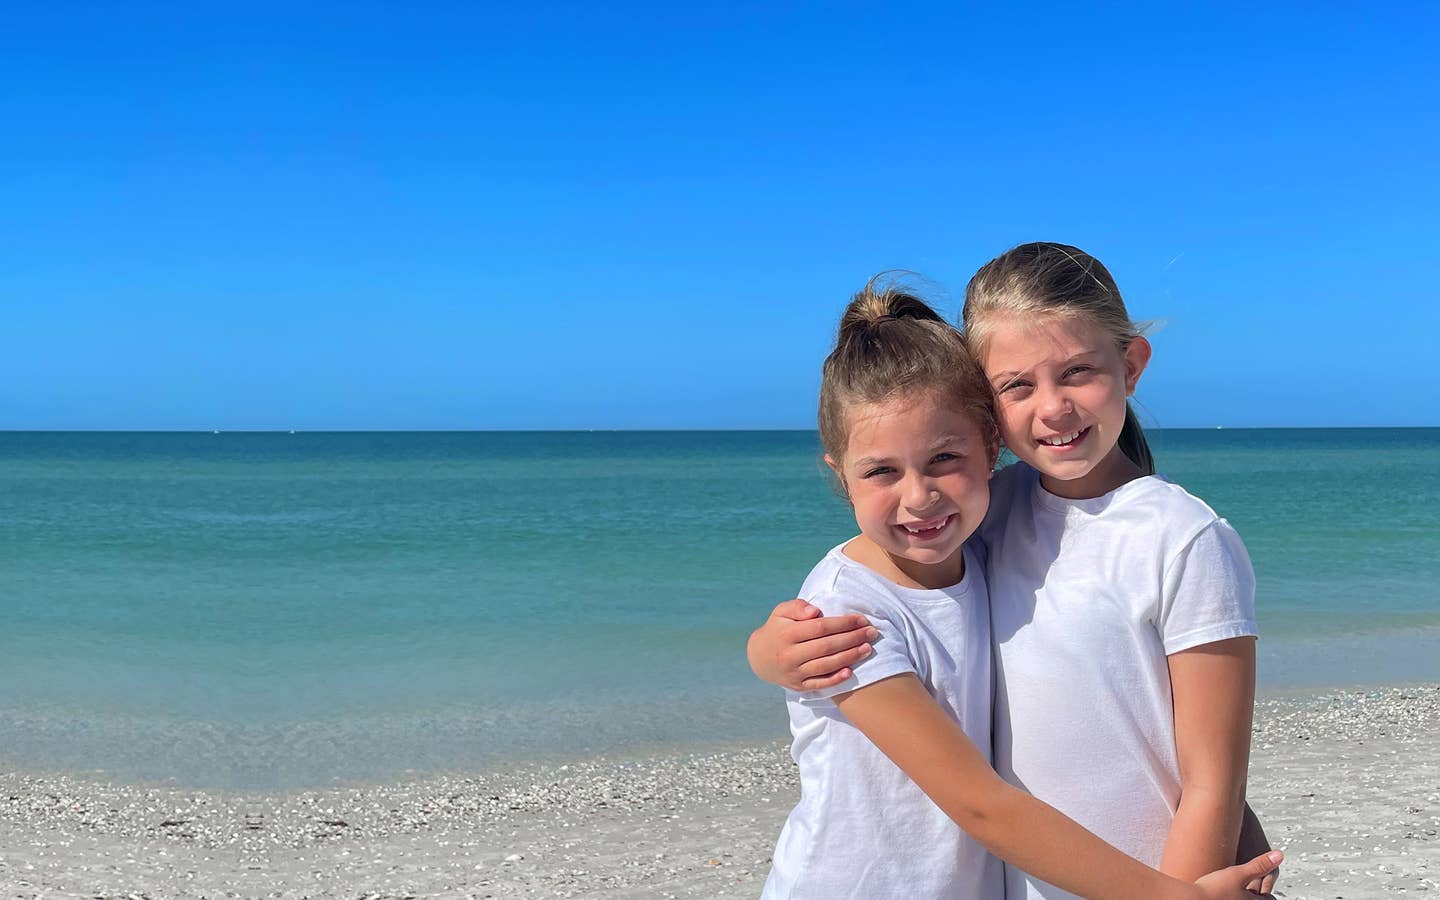 Two caucasian girls wearing white t-shirts and running shorts stand on a beach.